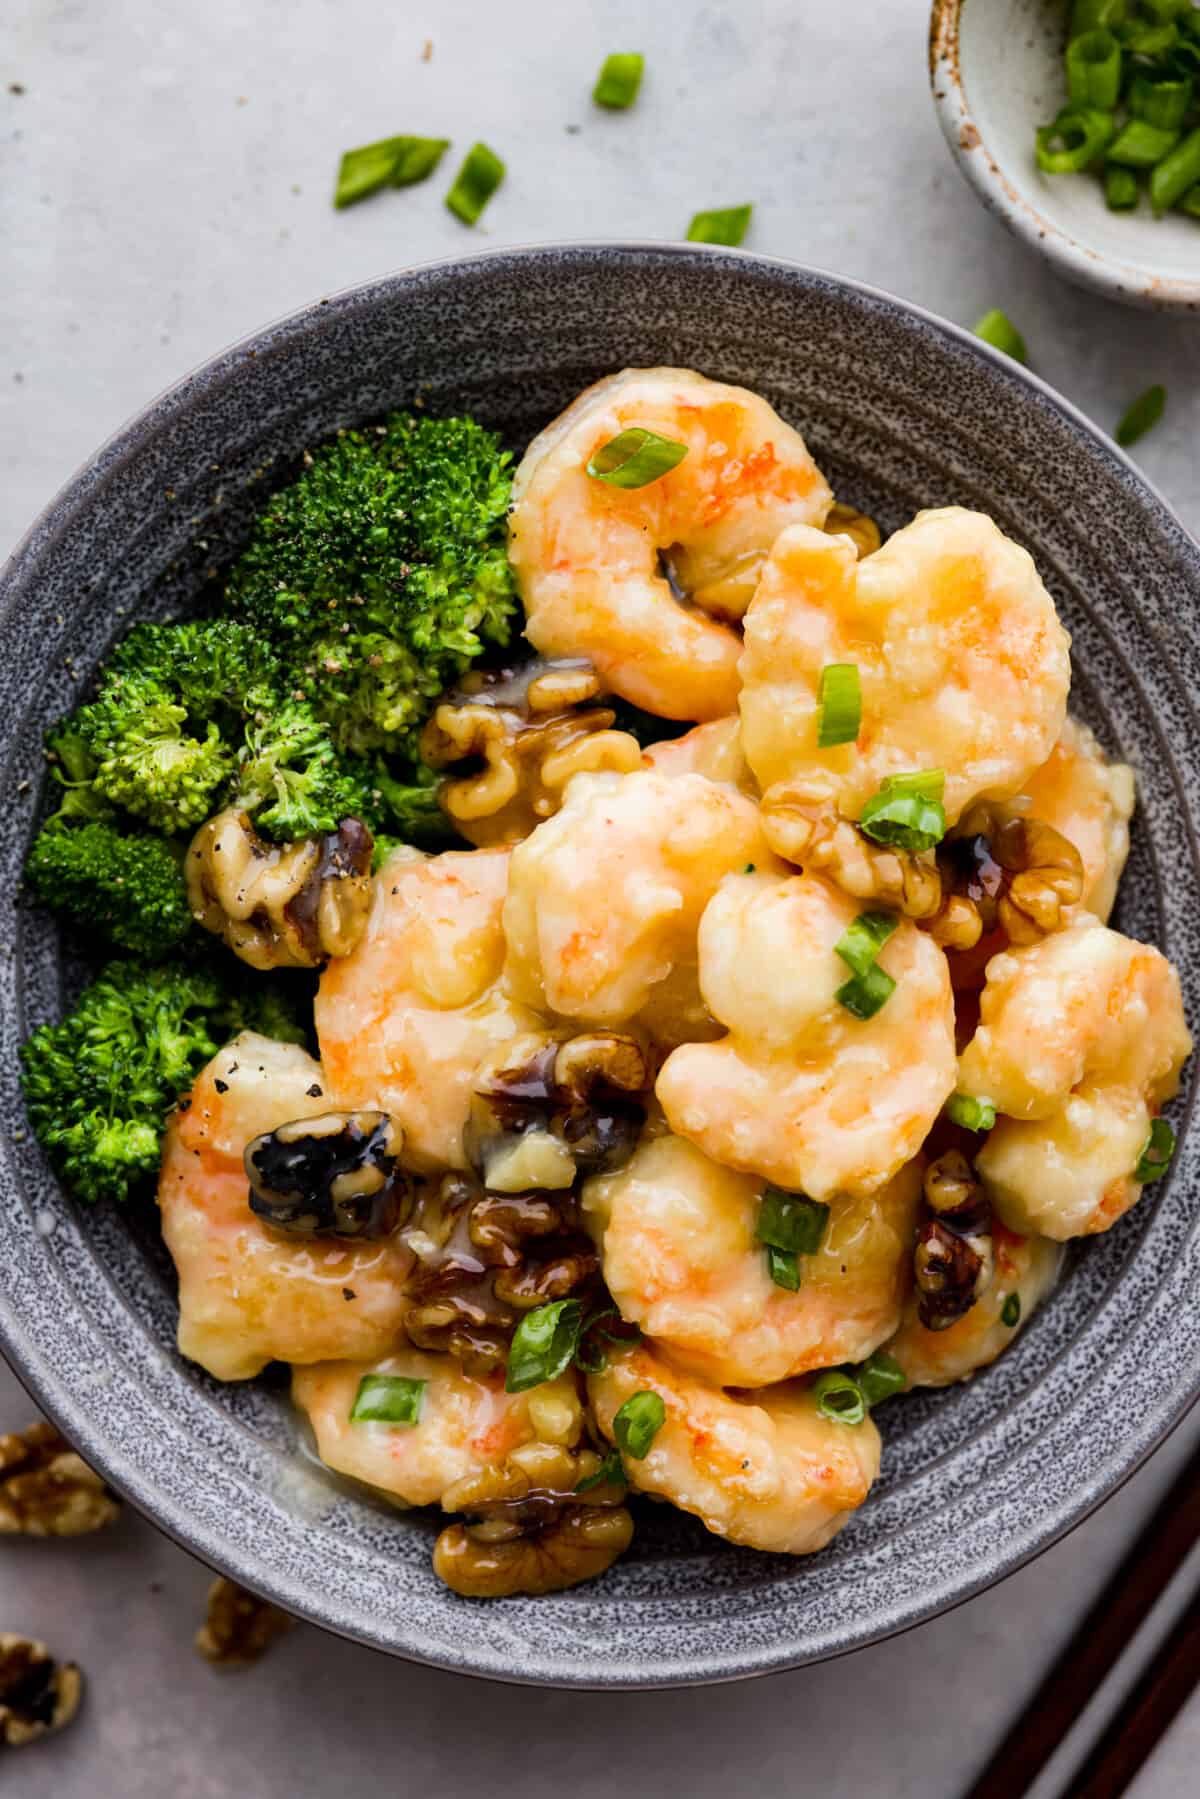 Shrimp served with broccoli in a gray bowl.